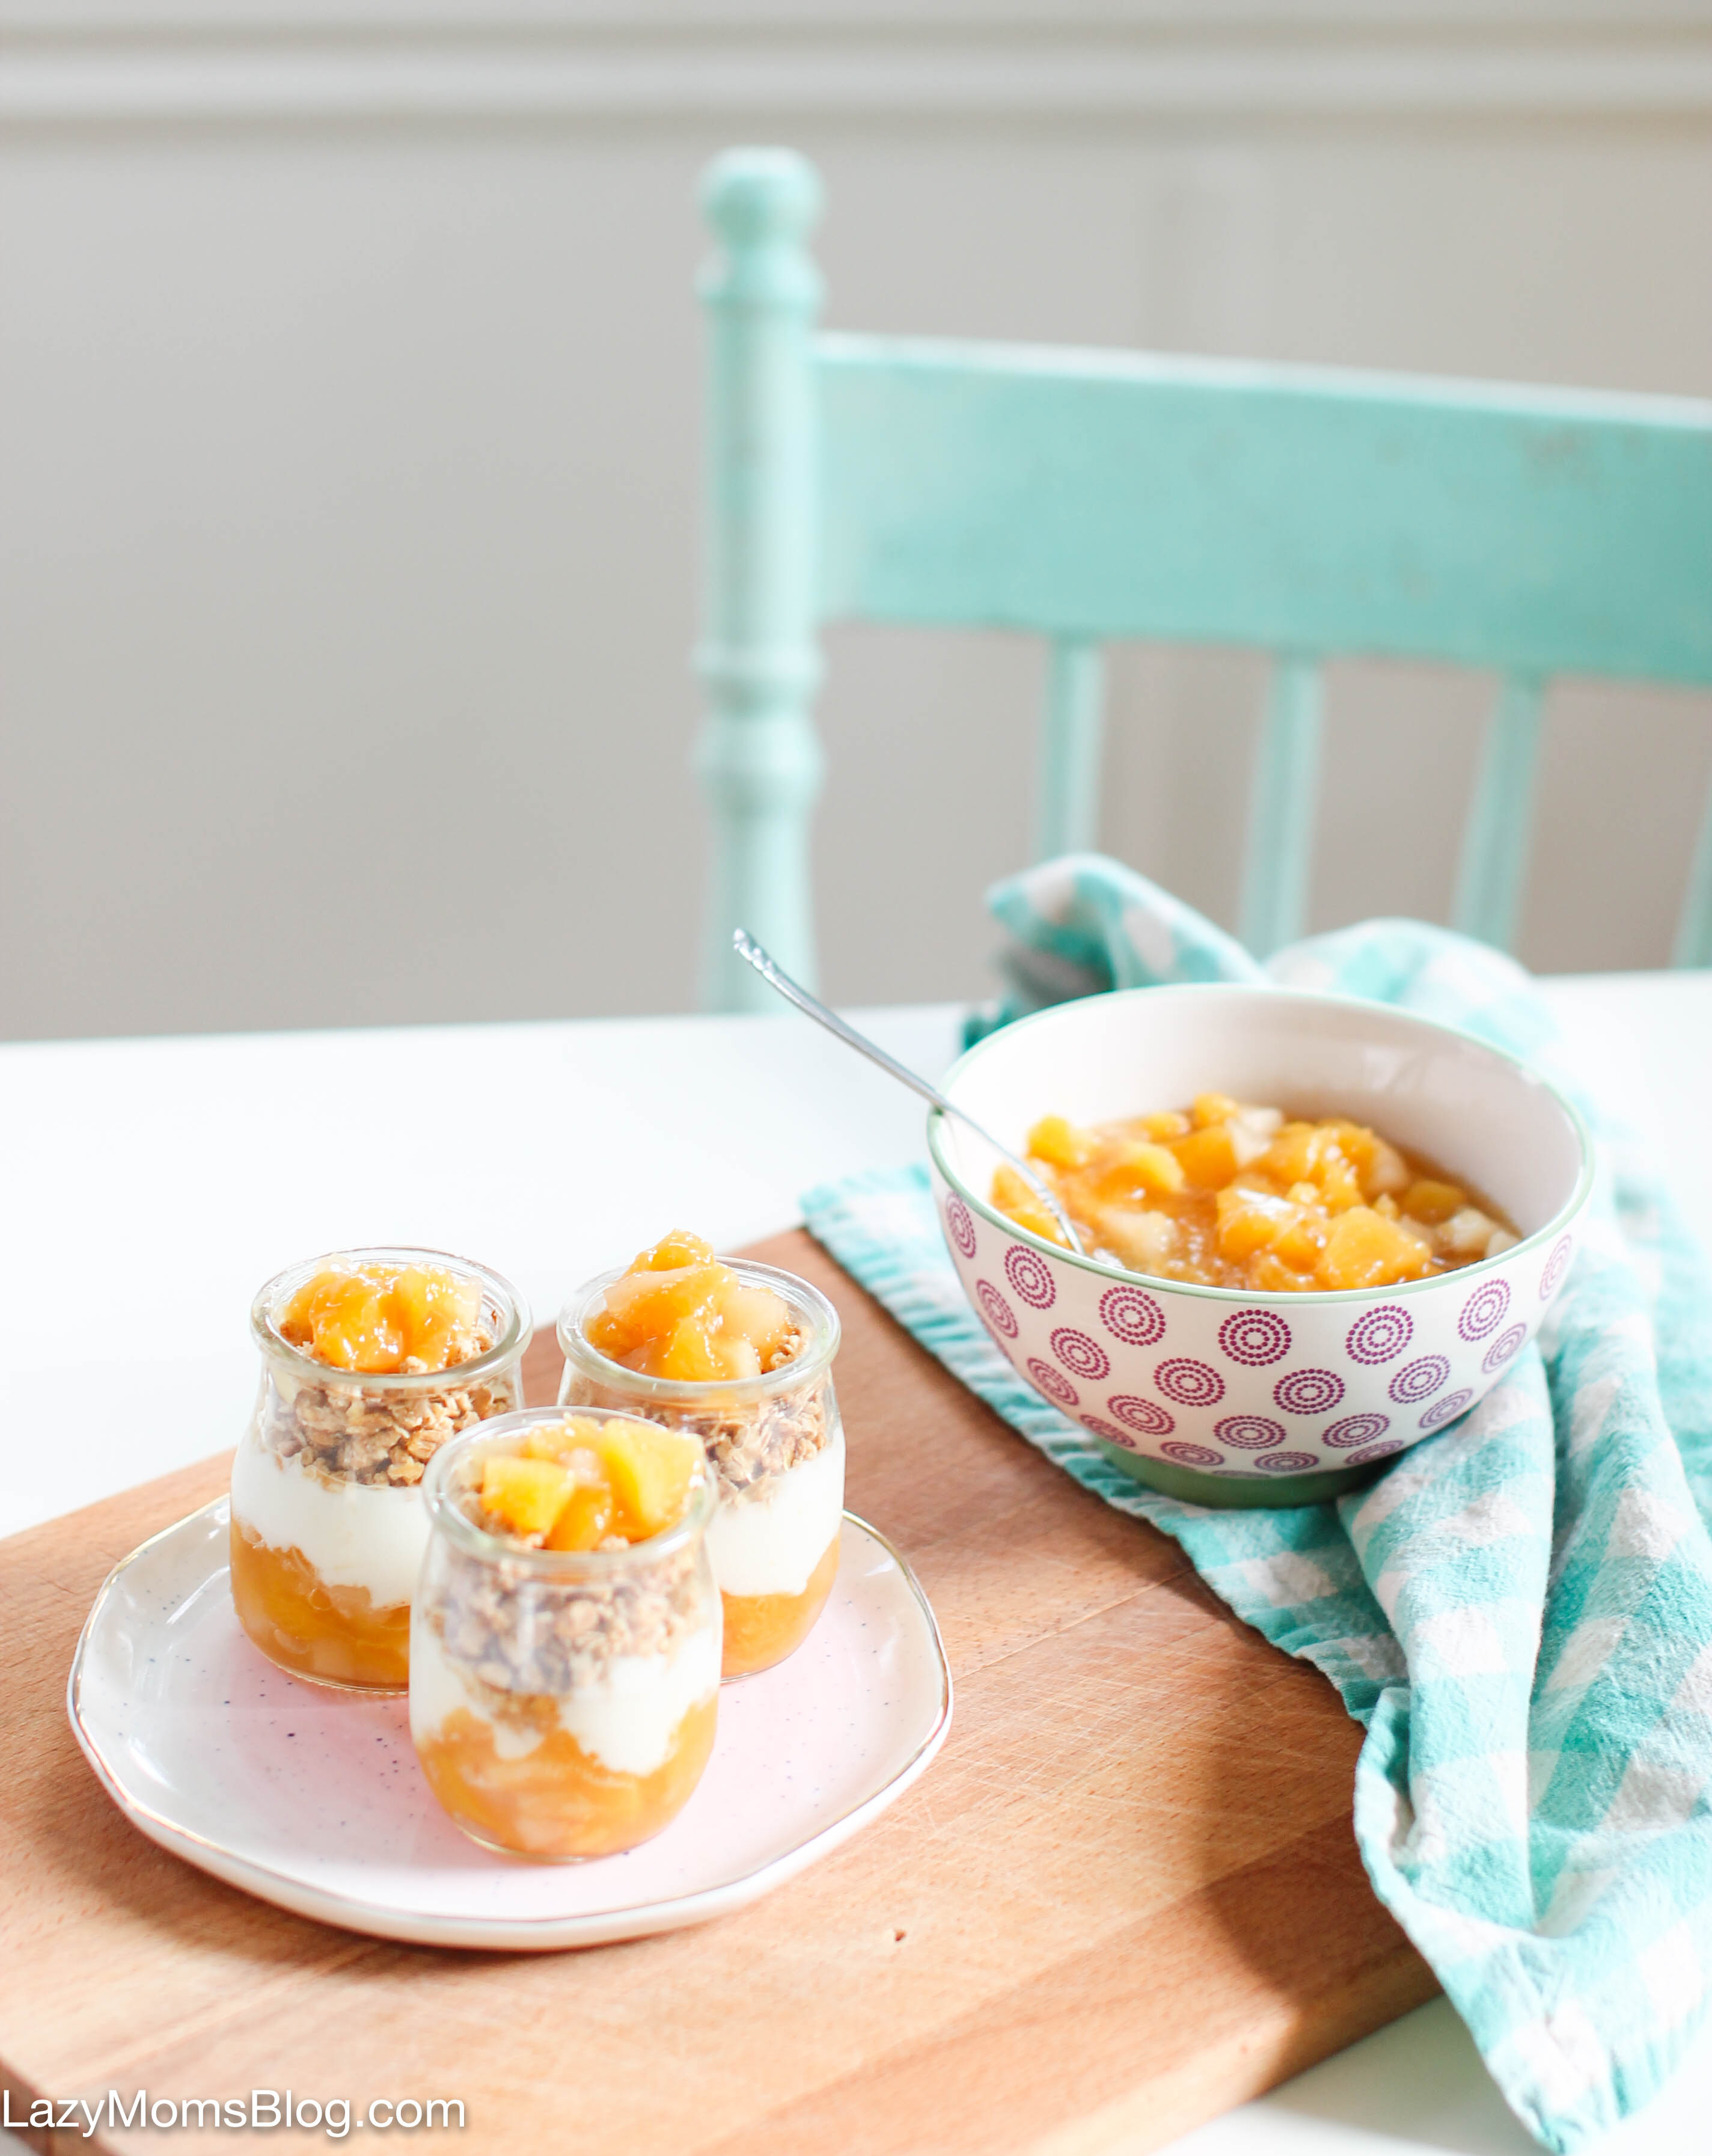 This apple & peach compote is just amazing served as a parfait and soo good on toast too! And it's so easy to make! 